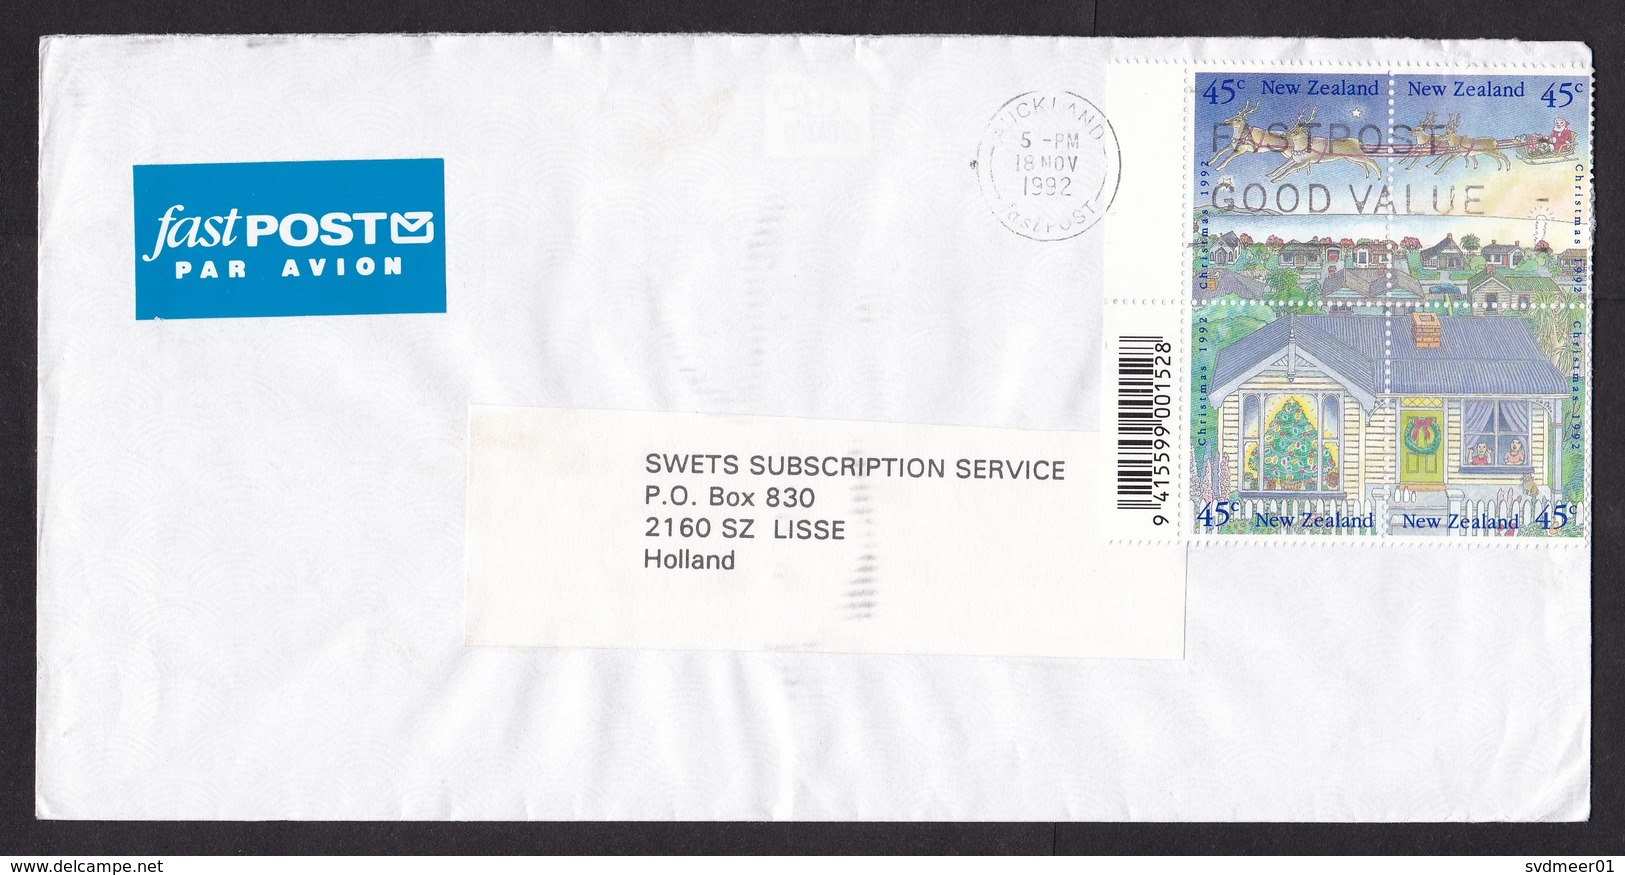 New Zealand: Airmail Cover To Netherlands, 1992, 4 Stamps, Christmas, Santa Claus, Fastpost Label (minor Damage) - Covers & Documents